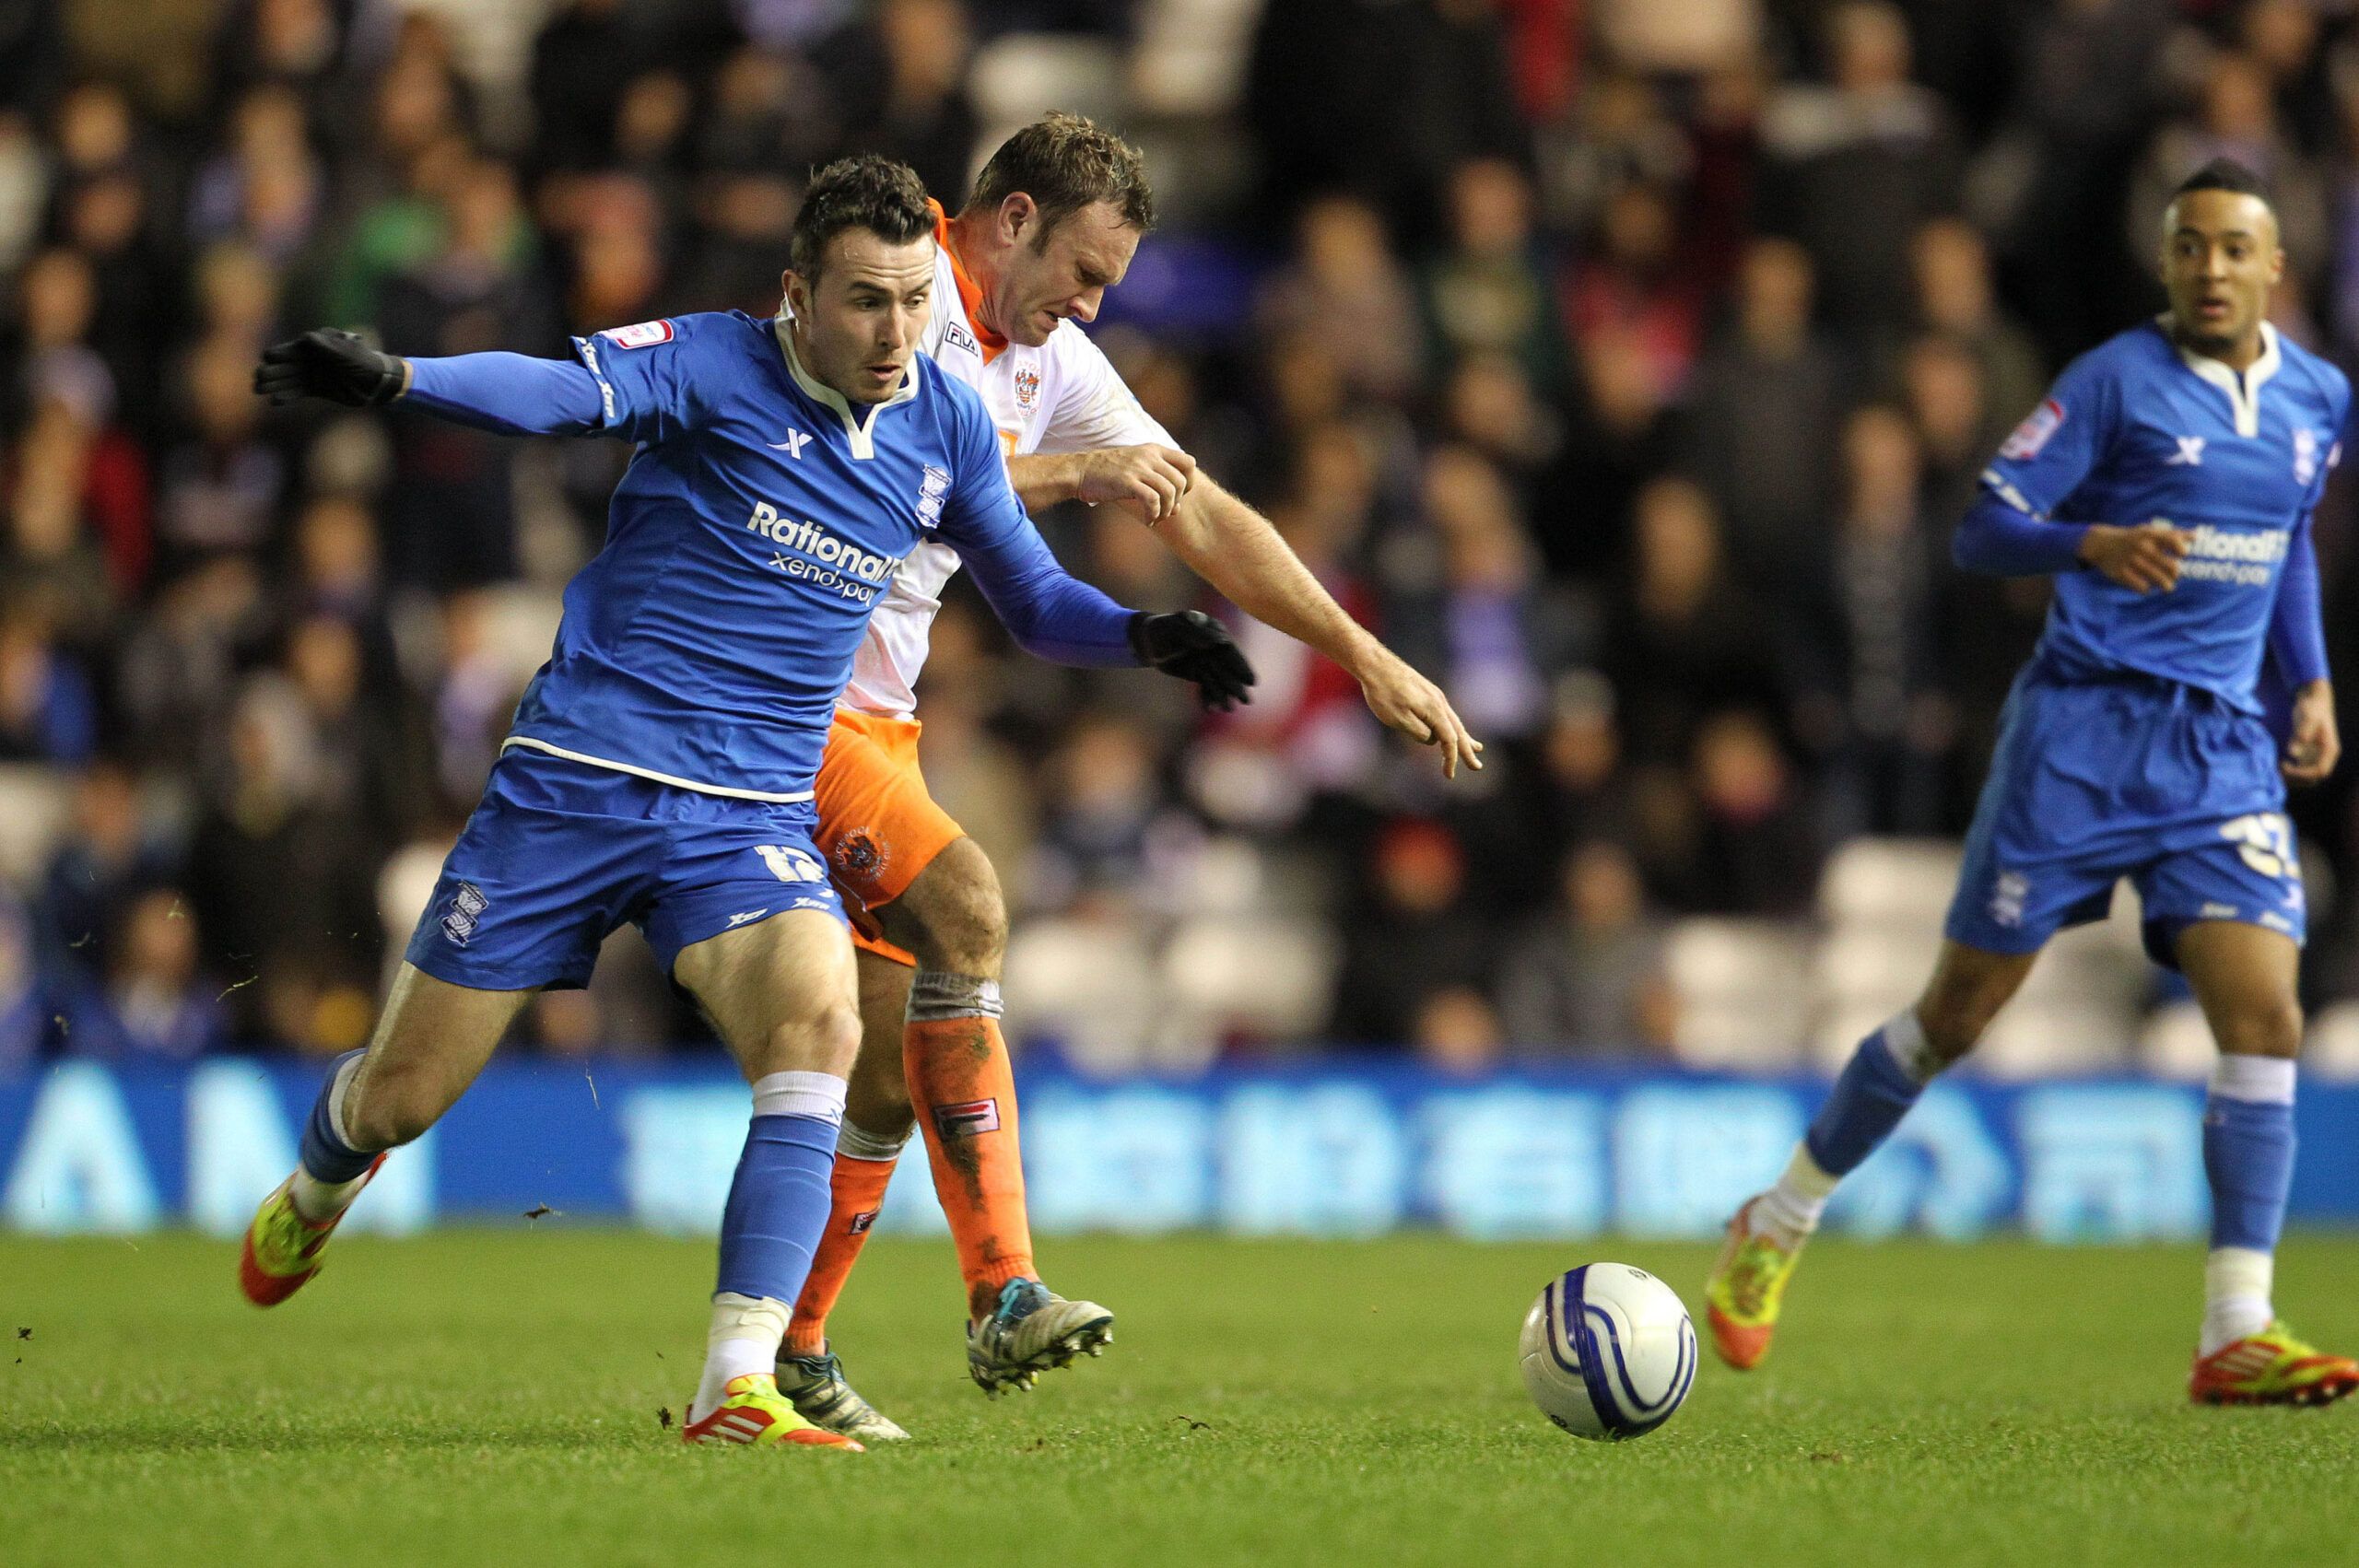 Football - Birmingham City v Blackpool npower Football League Championship - St Andrews - 31/12/11 
Jordon Mutch of Birmingham City (L) and Ian Evatt of Blackpool in action 
Mandatory Credit: Action Images / John Clifton 
Livepic 
EDITORIAL USE ONLY. No use with unauthorized audio, video, data, fixture lists, club/league logos or live services. Online in-match use limited to 45 images, no video emulation. No use in betting, games or single club/league/player publications.  Please contact your ac